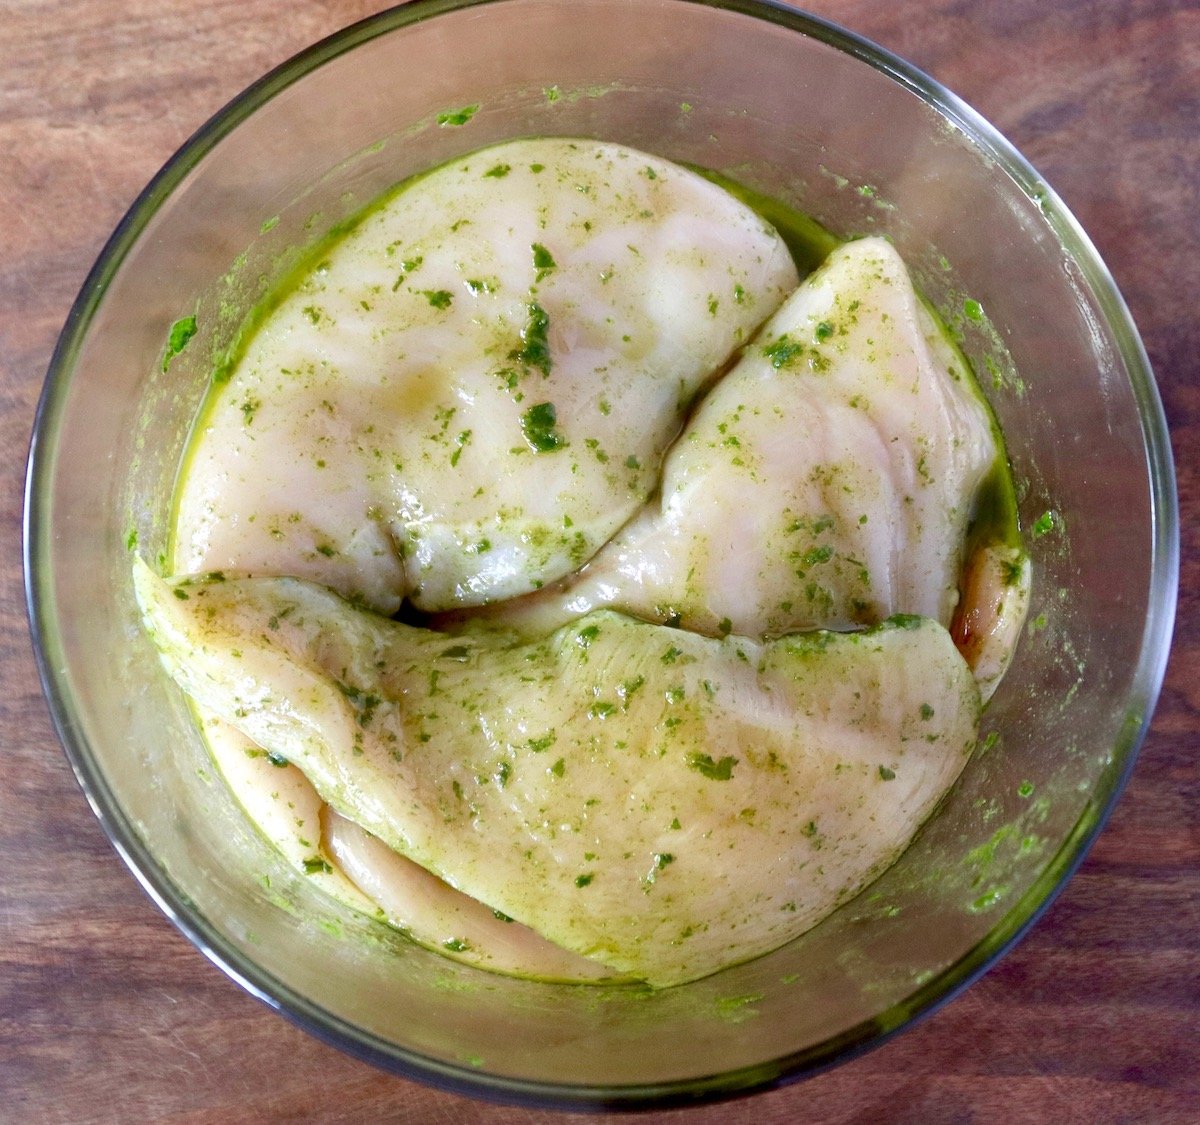 Three raw chicken breasts marinating in basil oil in a glass bowl.